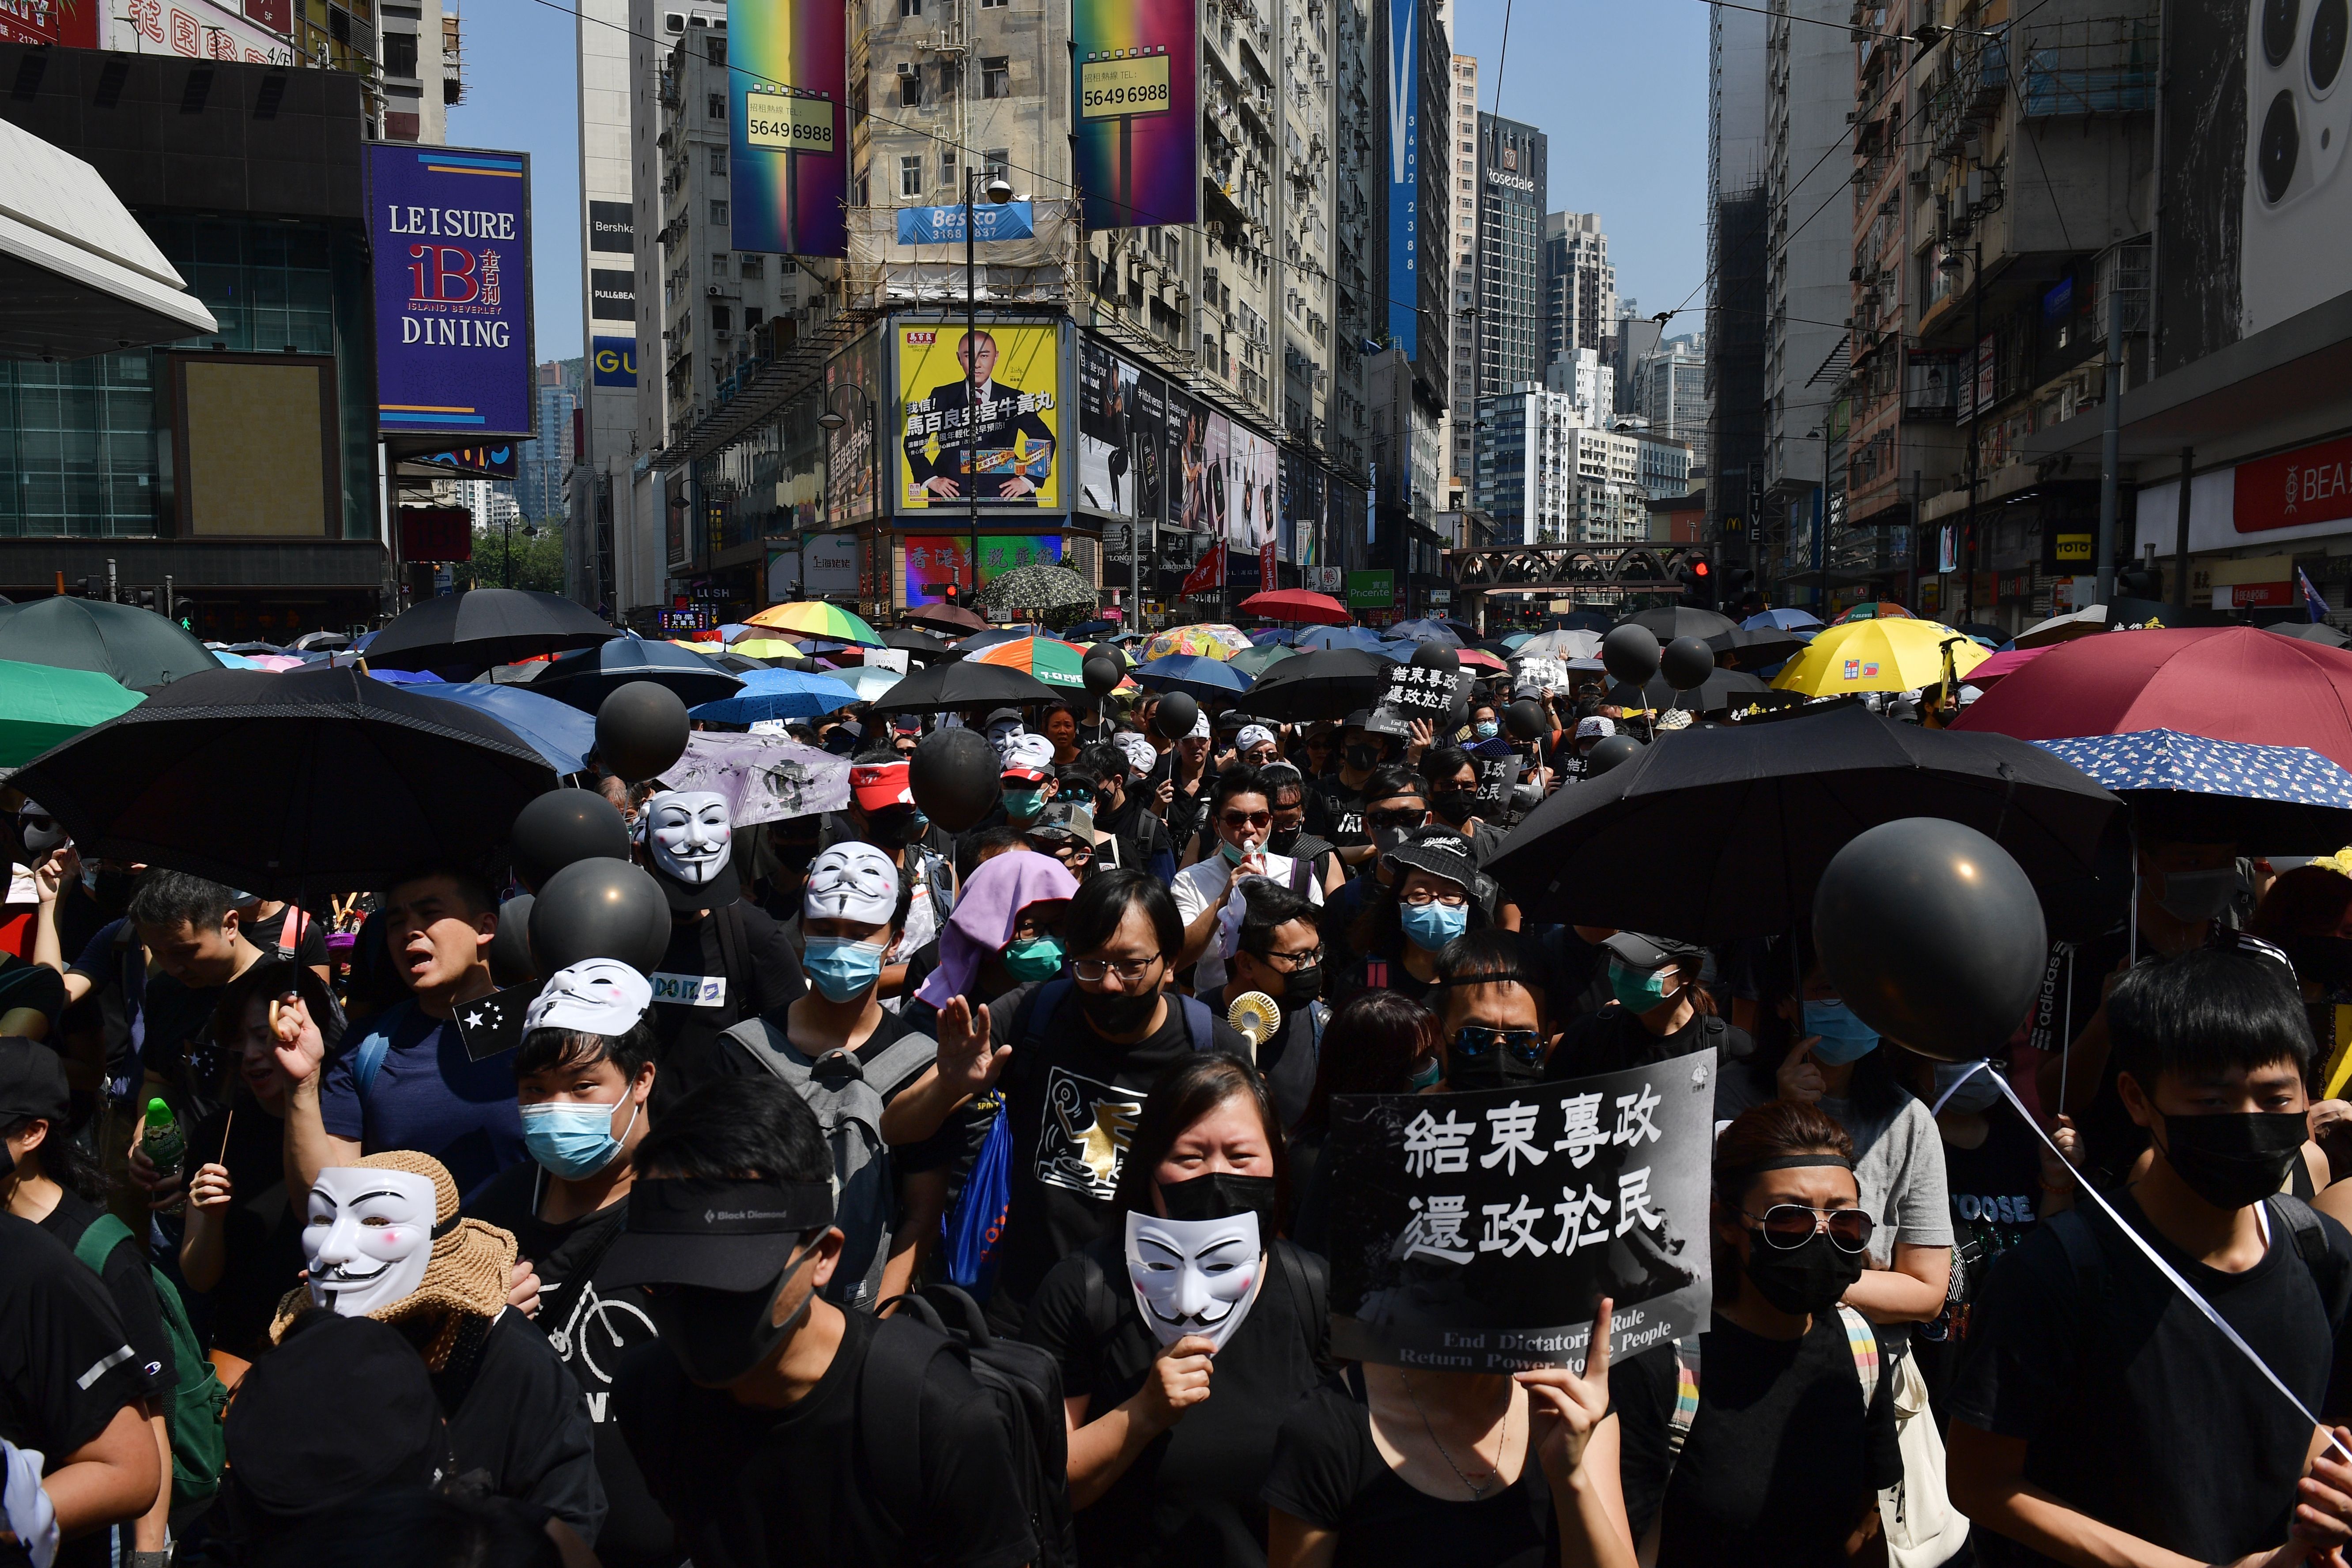 Protesters carry black balloons as they take part in a march in the Causeway Bay shopping district in Hong Kong on October 1